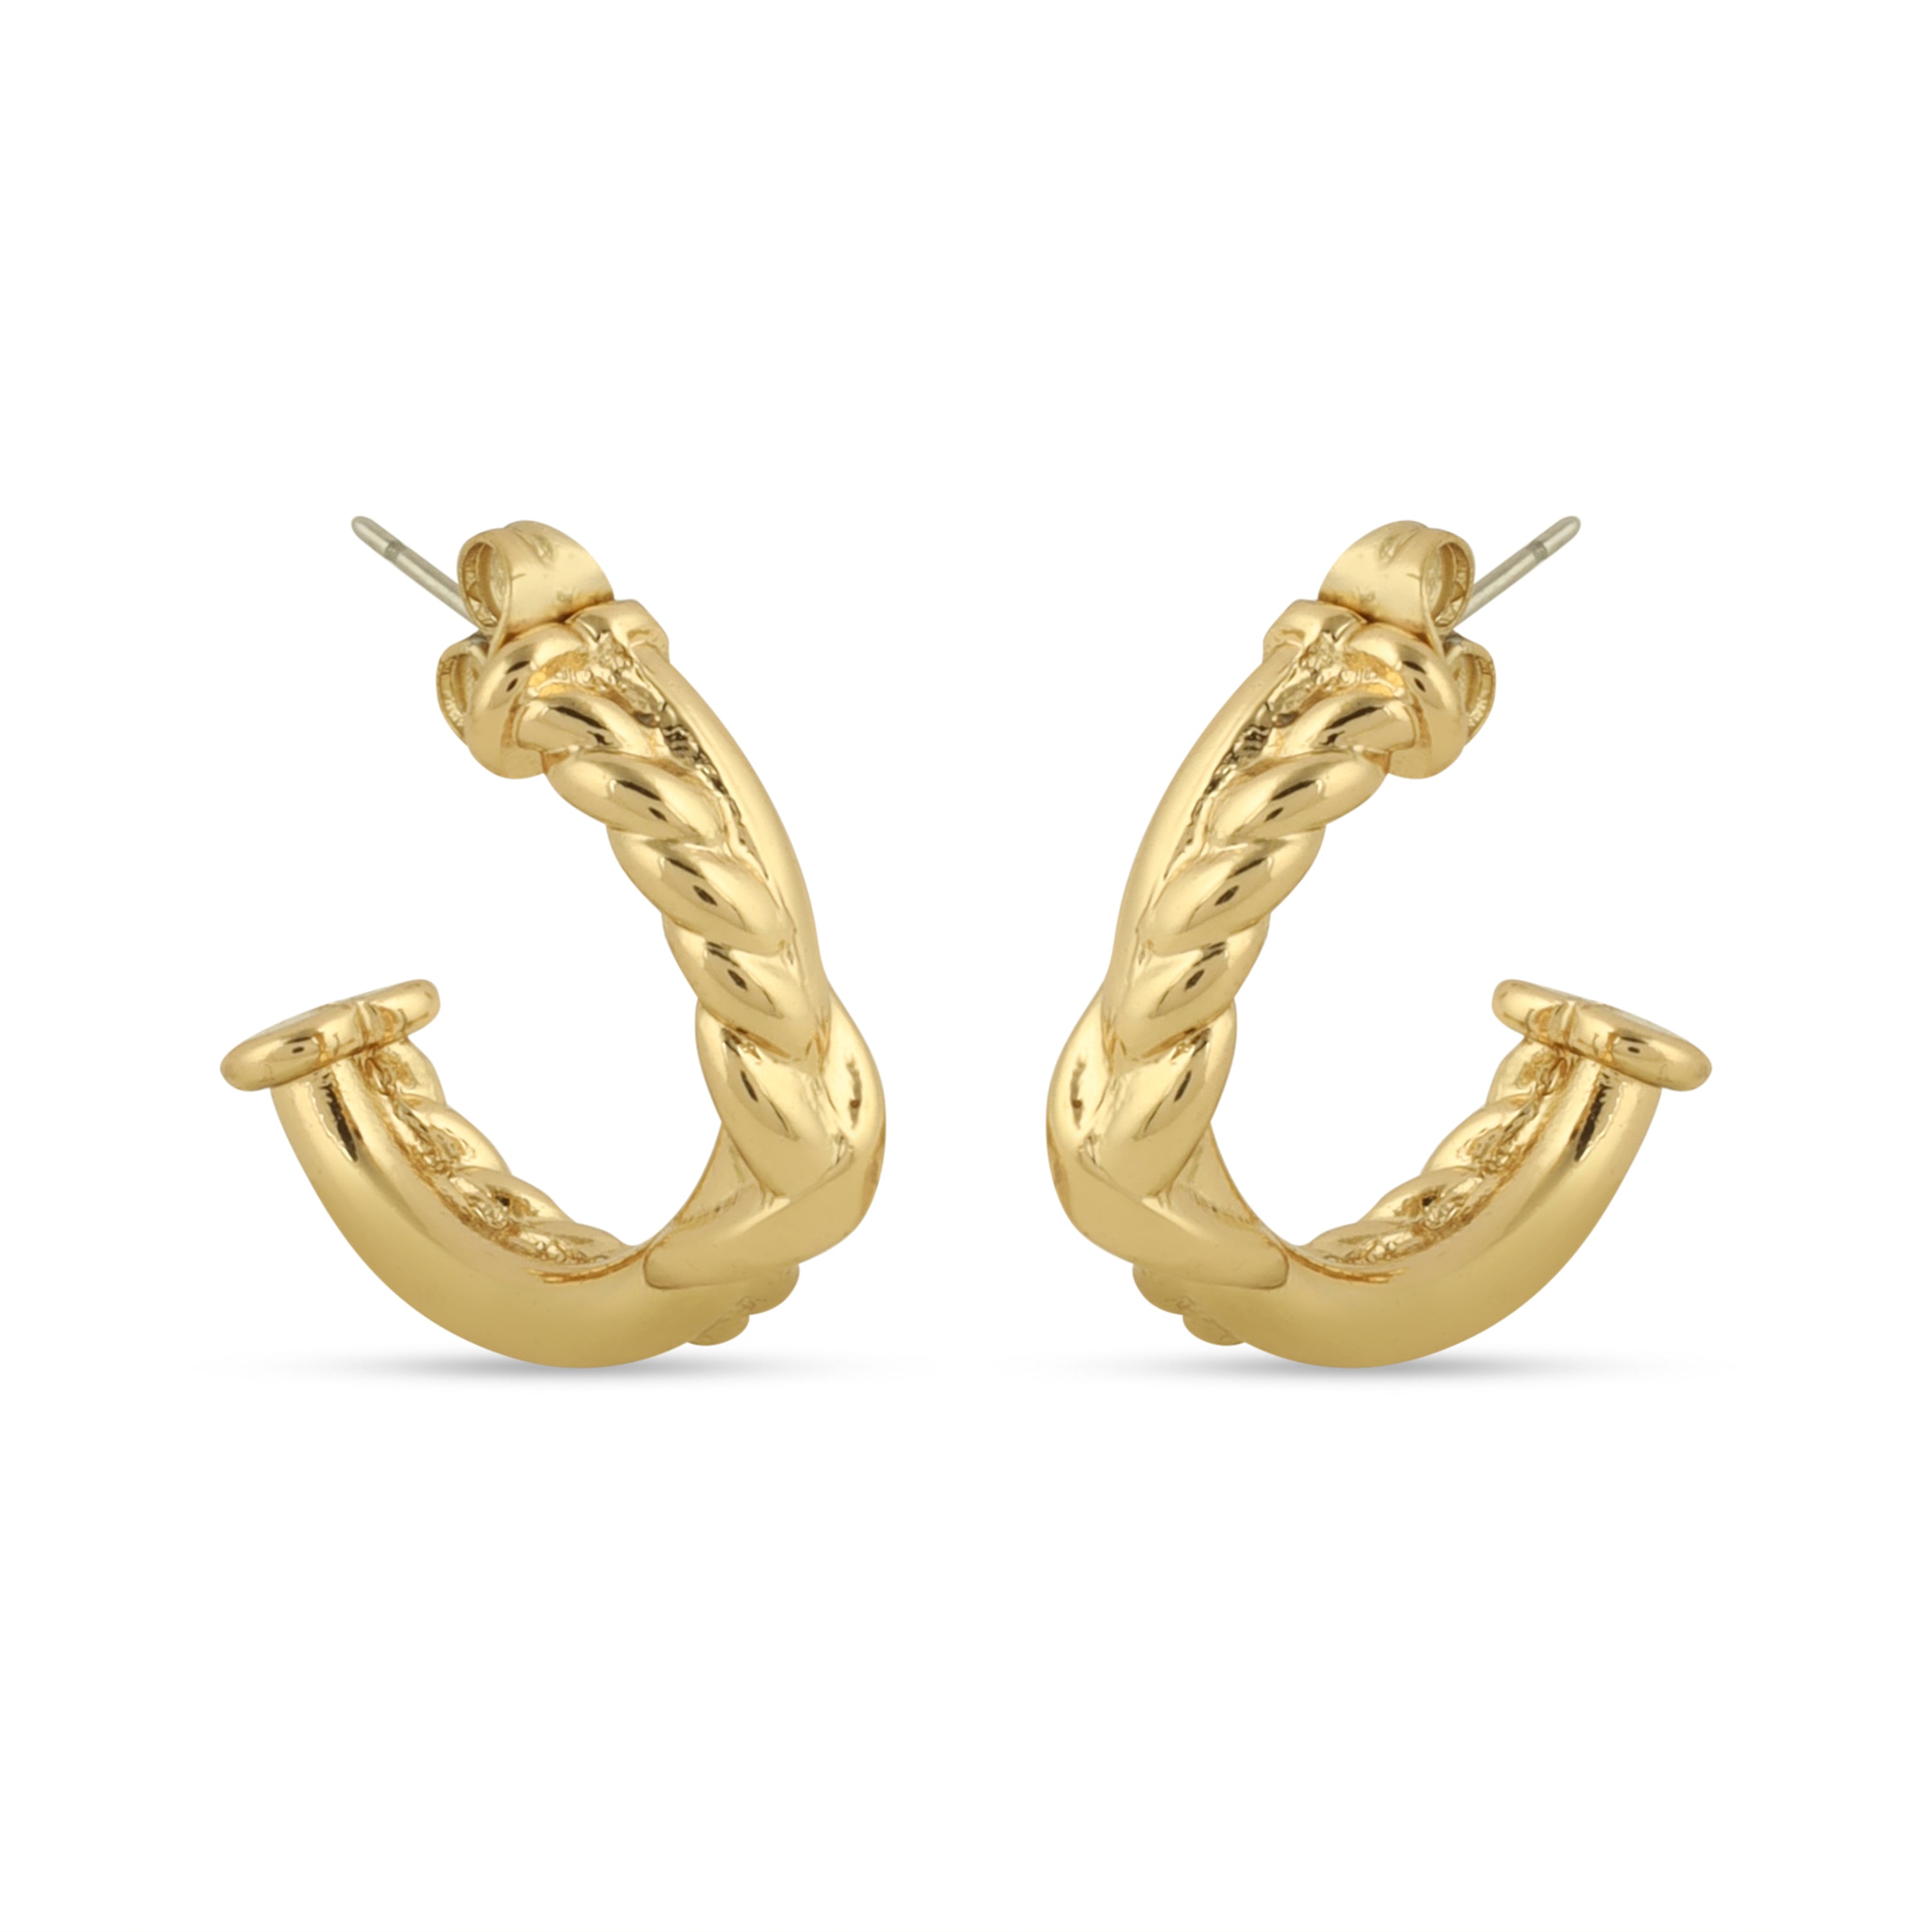 TFC Half n Half Curly Gold Plated Hoop Earrings- Discover daily wear gold earrings including stud earrings, hoop earrings, and pearl earrings, perfect as earrings for women and earrings for girls.Find the cheapest fashion jewellery which is anti-tarnis​h only at The Fun company.